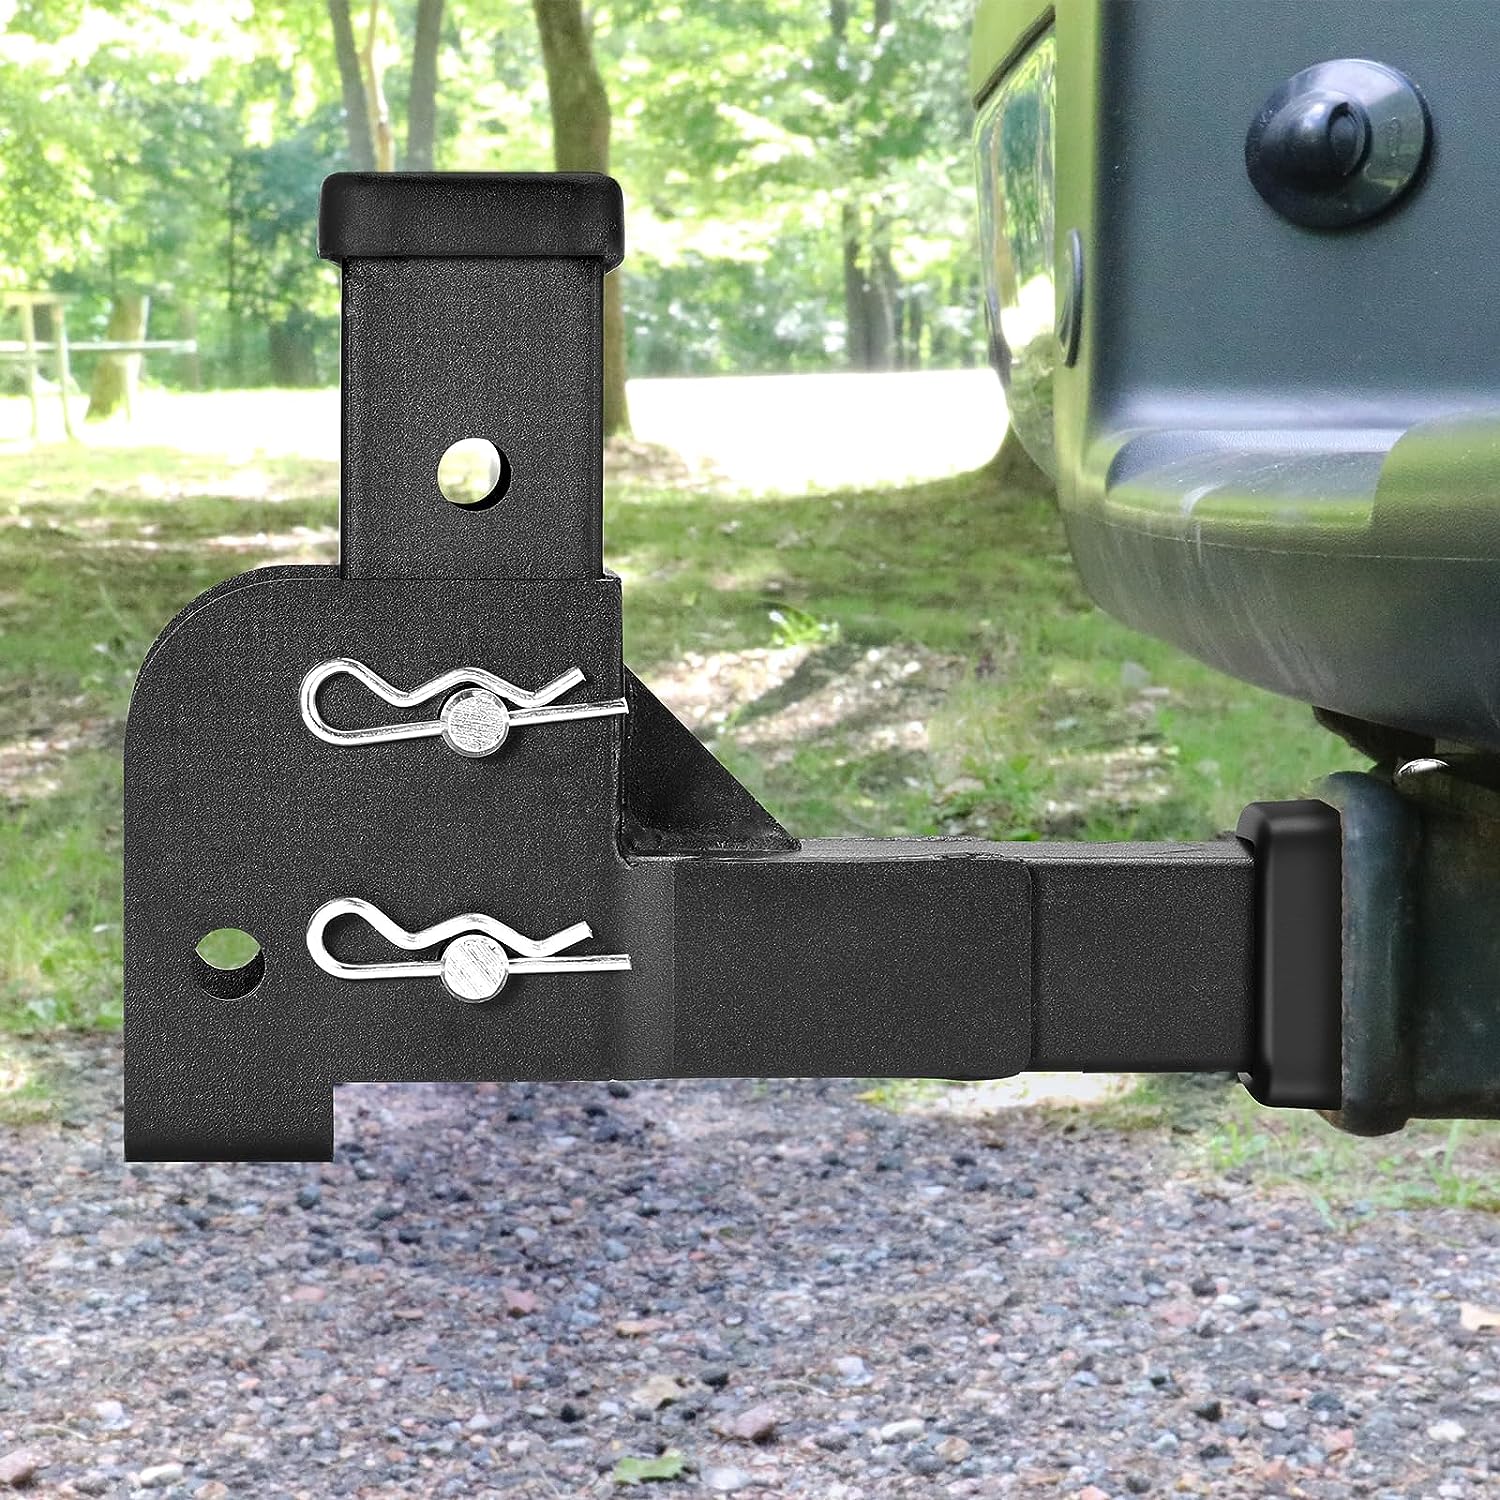 HVDI Folding 2" Trailer Hitch Adapter, 800LBS Foldable 2 inch Receiver Hitch Adapter Trailer Hitch Cargo Wheelchair Carrier Adapter Compatible with 2 Inch Trailer Hitches